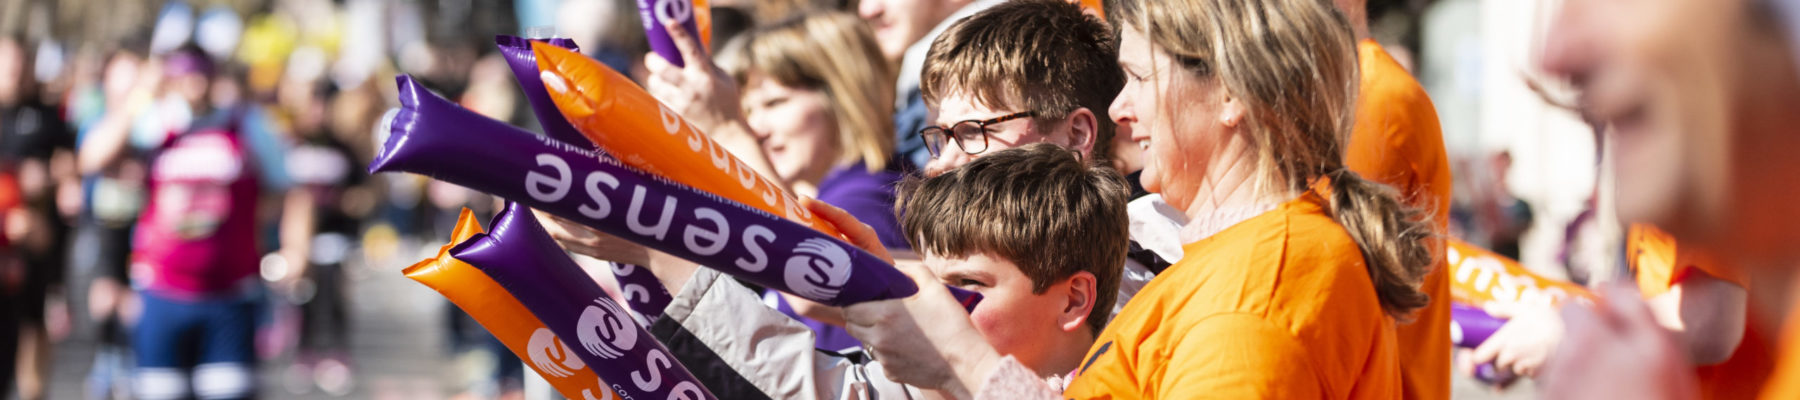 A group of people with orange and purple inflatable sticks cheer runners as they go by